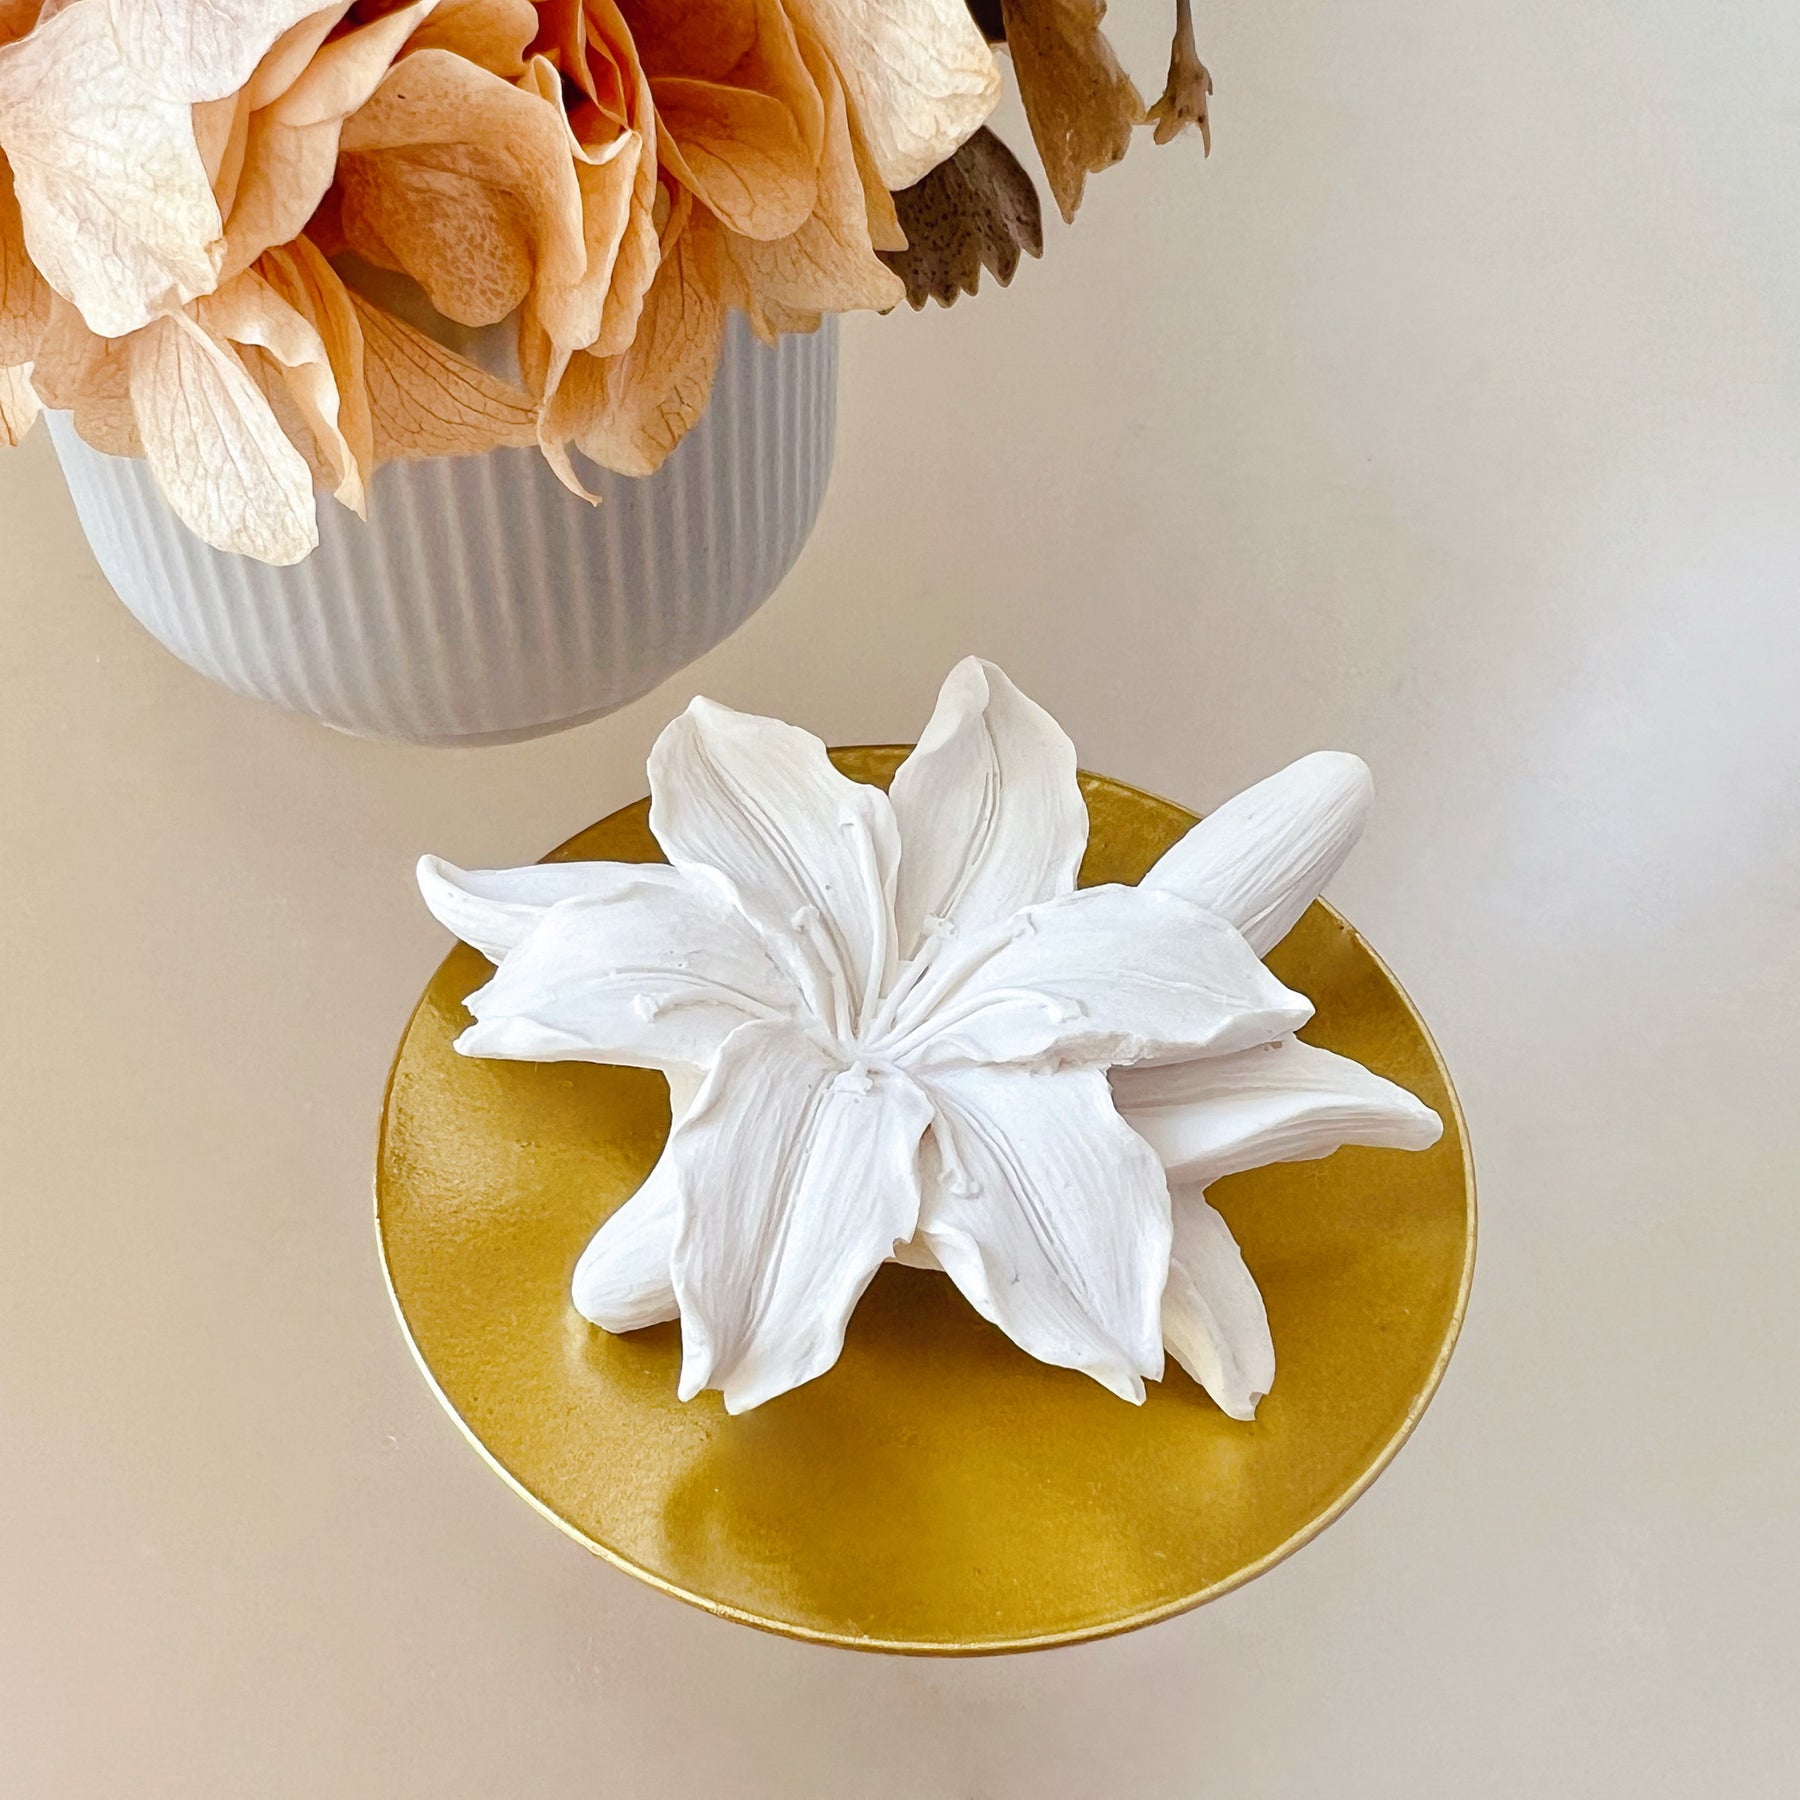 Lily Flower Air Freshener Car Hanging Diffuser | LMJ Candles